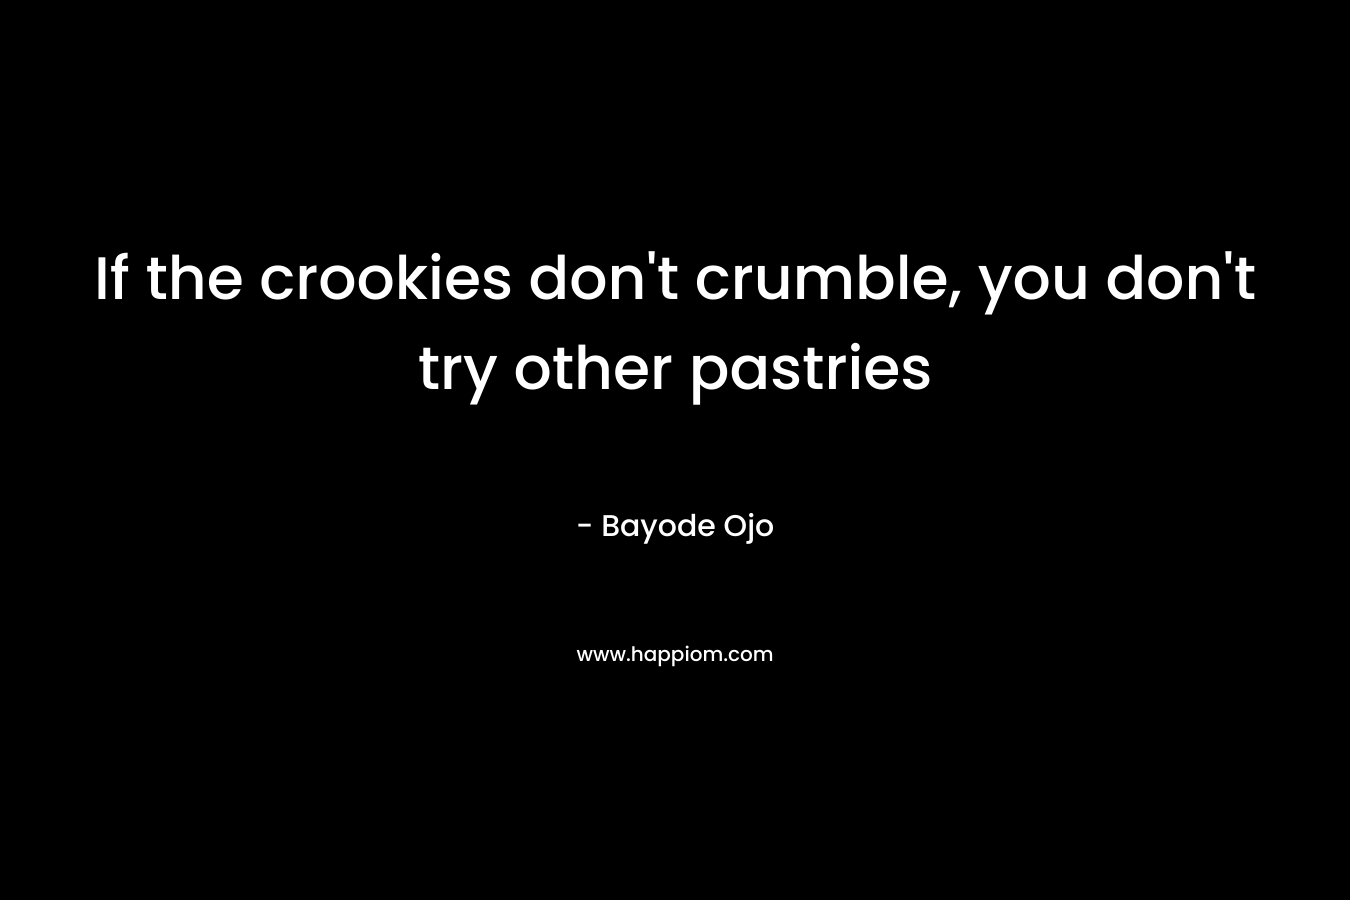 If the crookies don’t crumble, you don’t try other pastries – Bayode Ojo